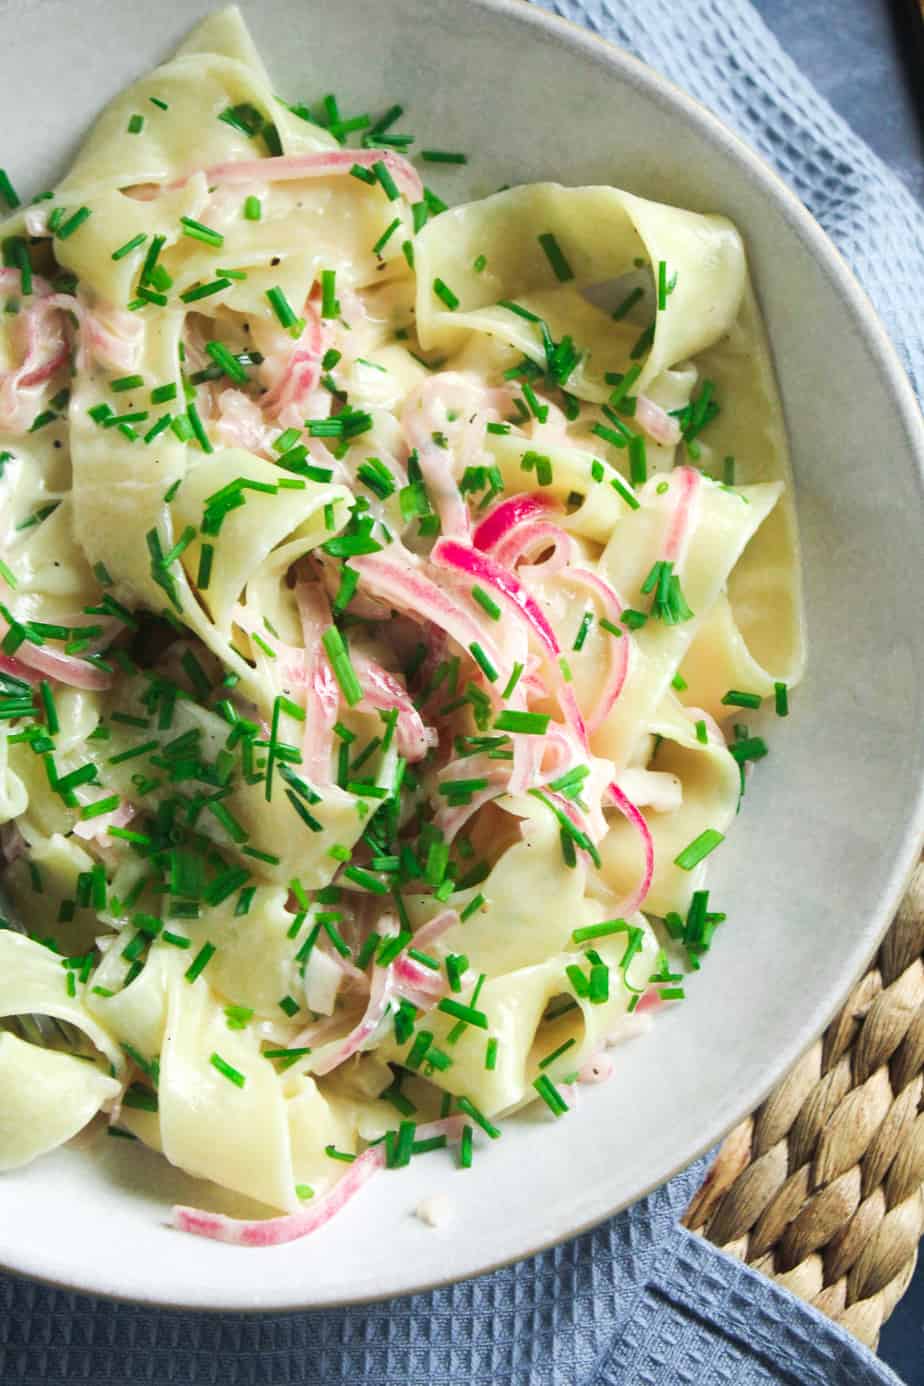 Prosecco Pasta with Lemon and Shallot